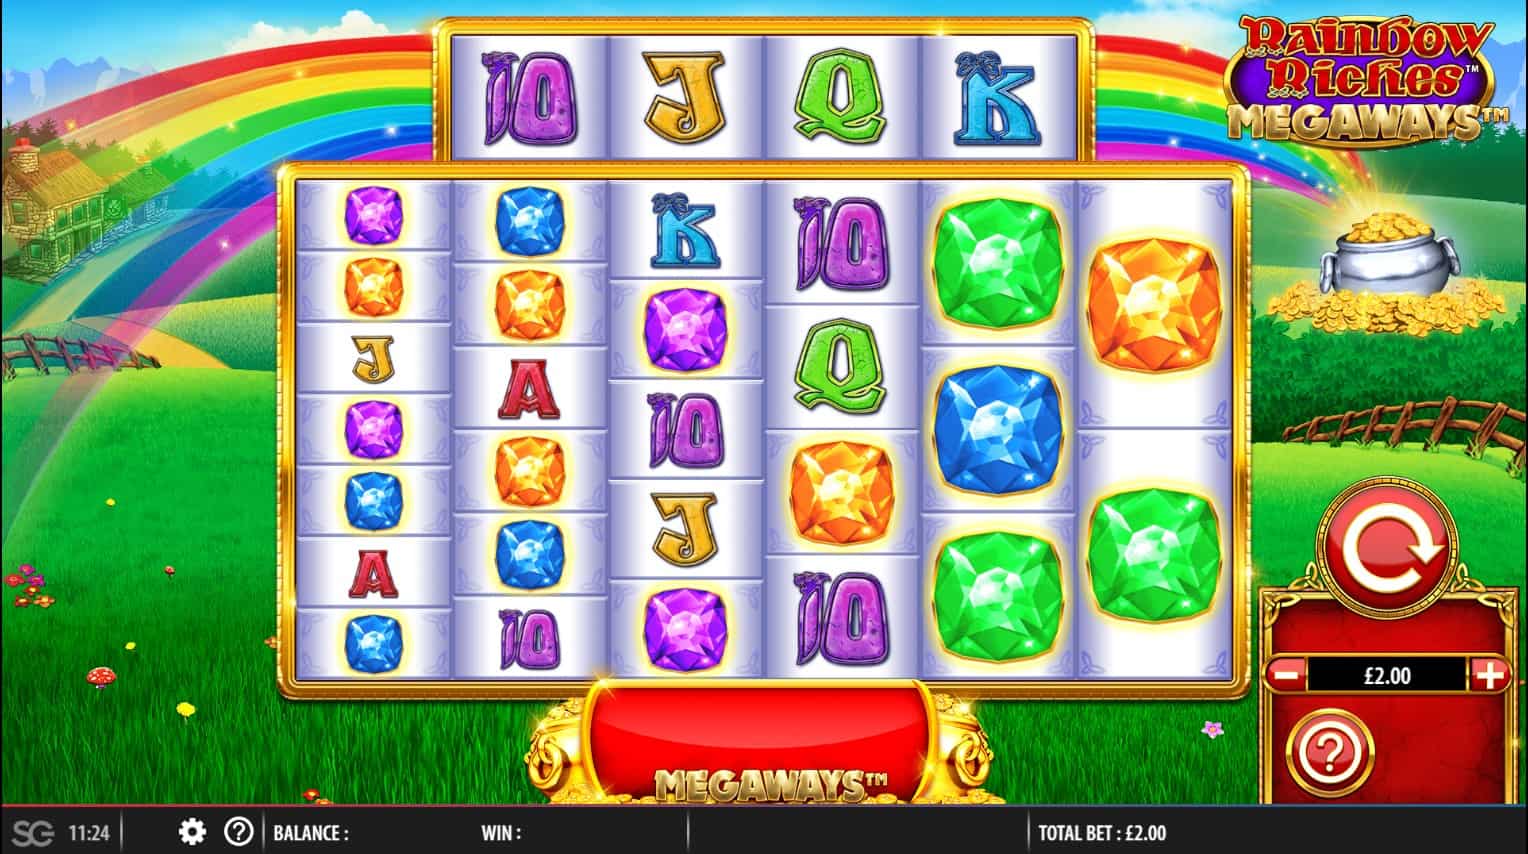 Rainbow Riches Megaways Gameplay Image for Review Purposes